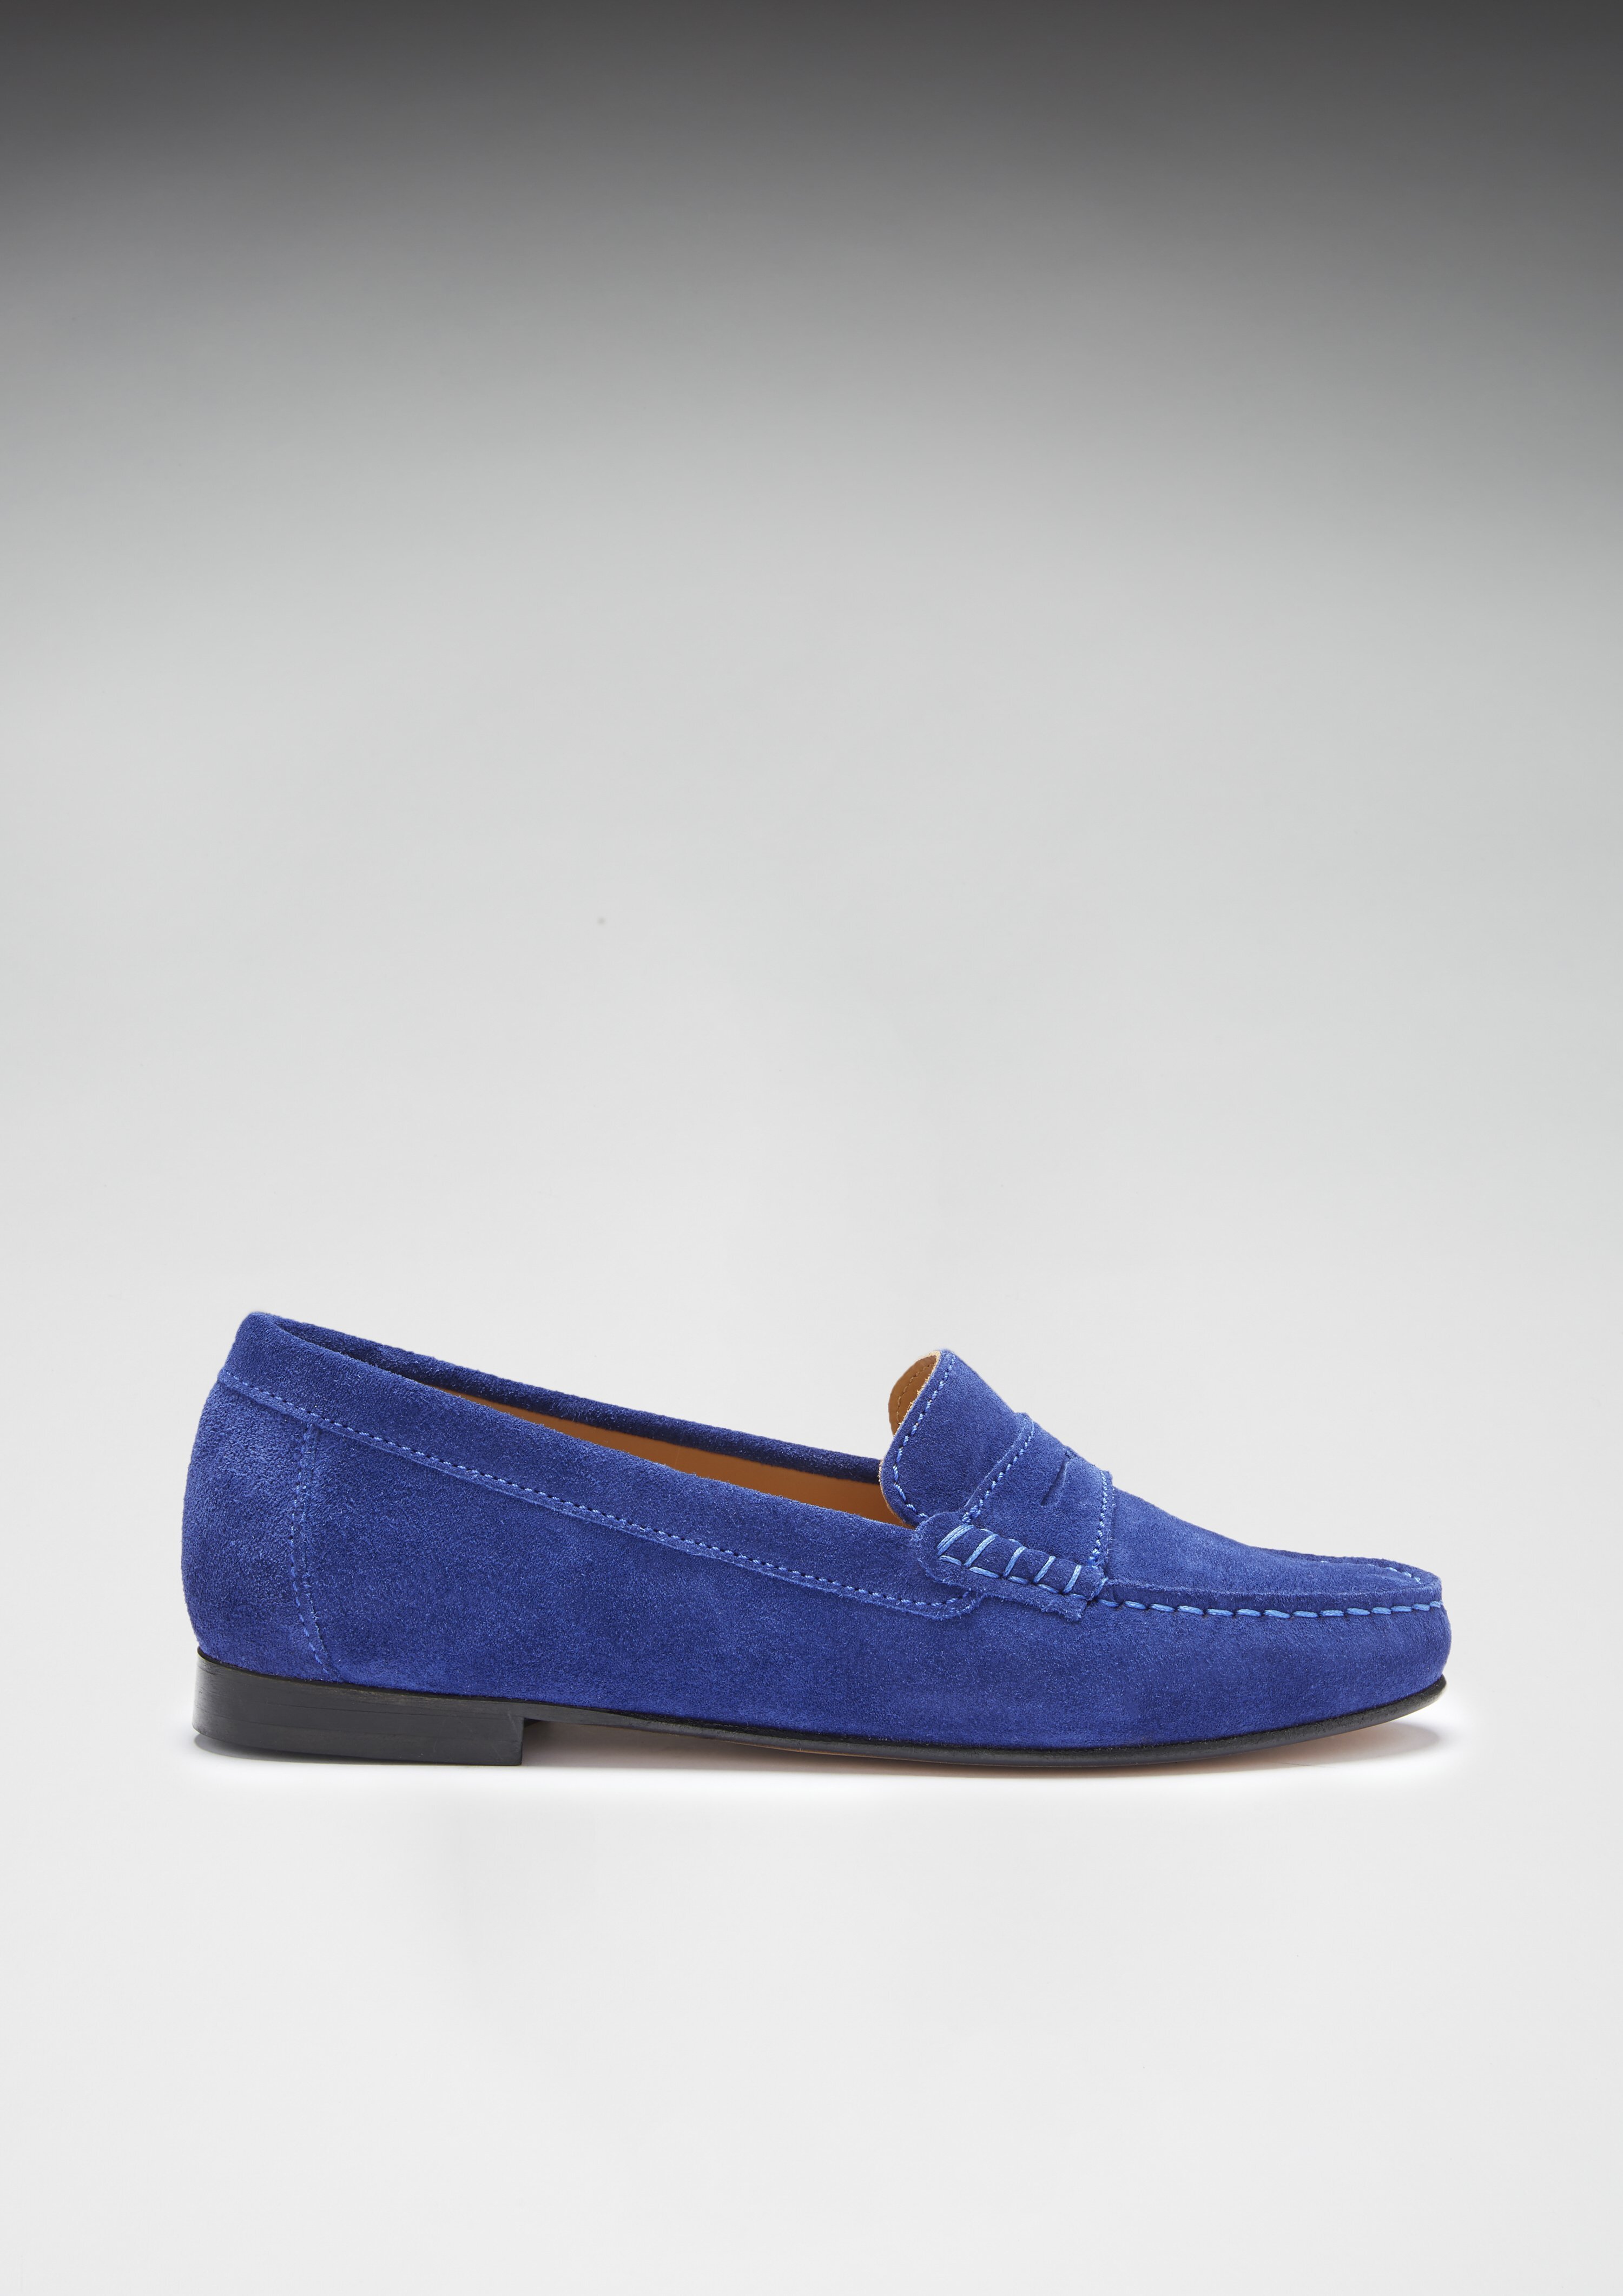 blue loafers womens